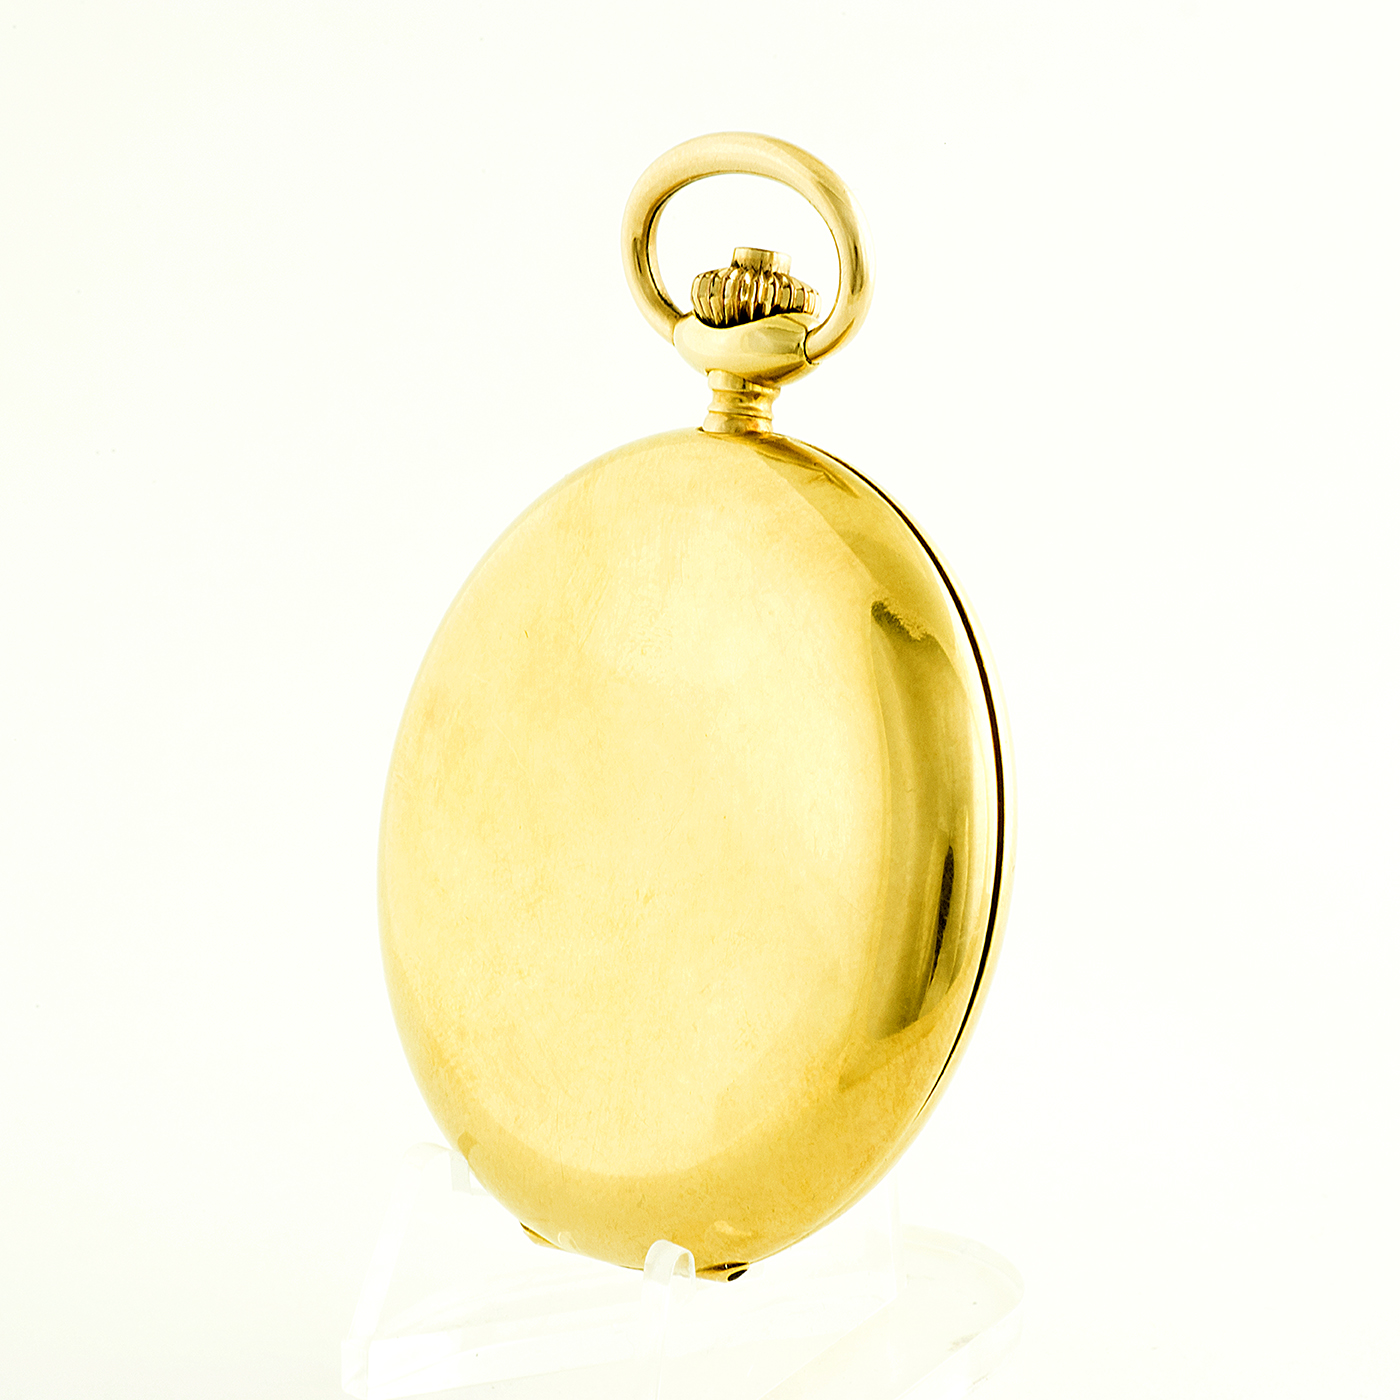 Auction Houses for Works of Art, Antiques, Jewels, Paintings, Watches:  POCKET WATCH, MEN'S WATCH, SABONETA, REMONTOIR